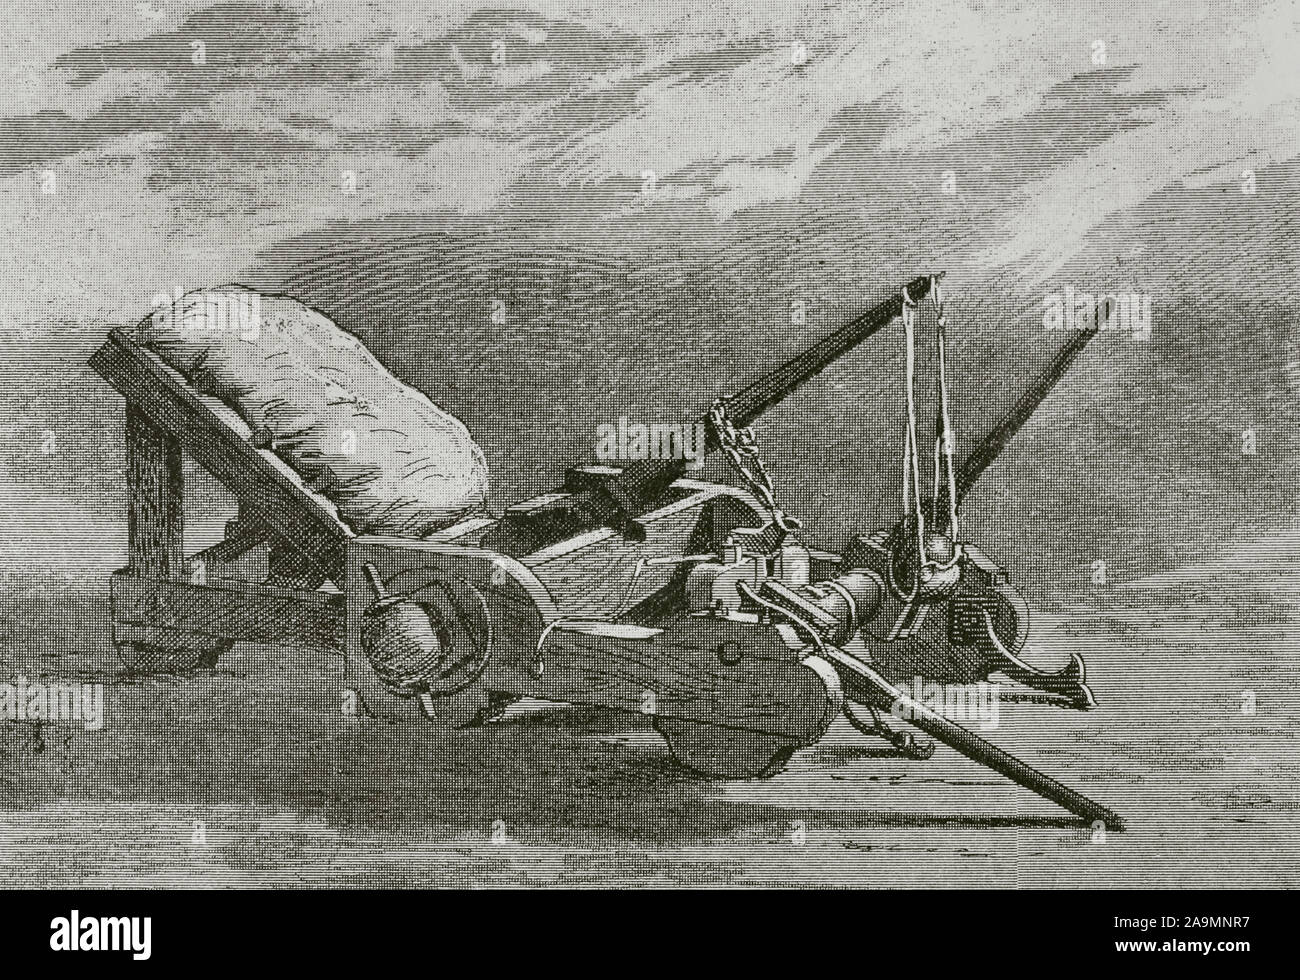 Onager. It was an imperial Roman torsion powered siege engine. Engraving. Museo Militar, 1883. Stock Photo